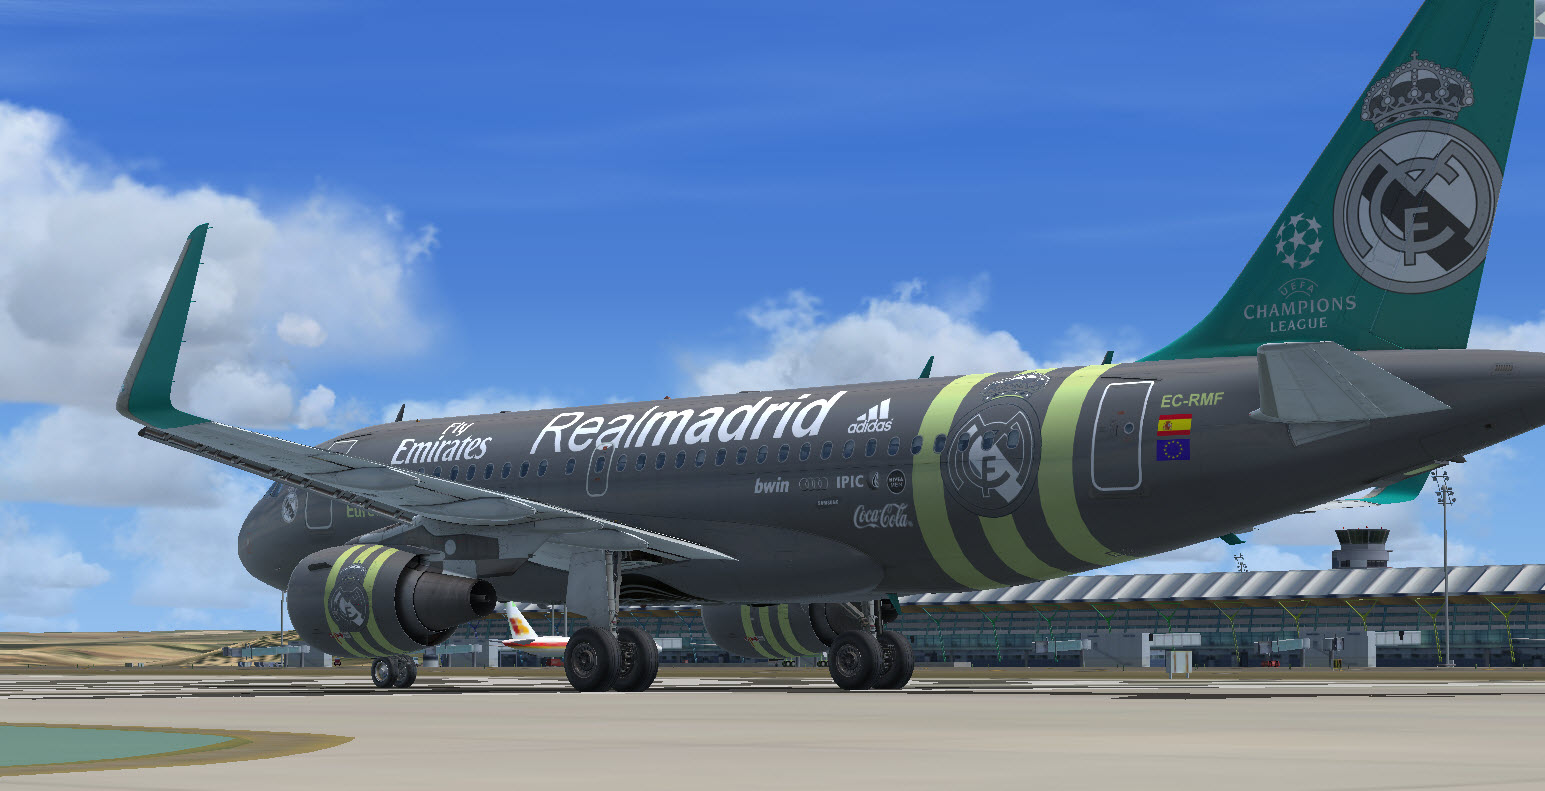 More information about "Aerosoft Airbus A319 Realmadrid fictional"